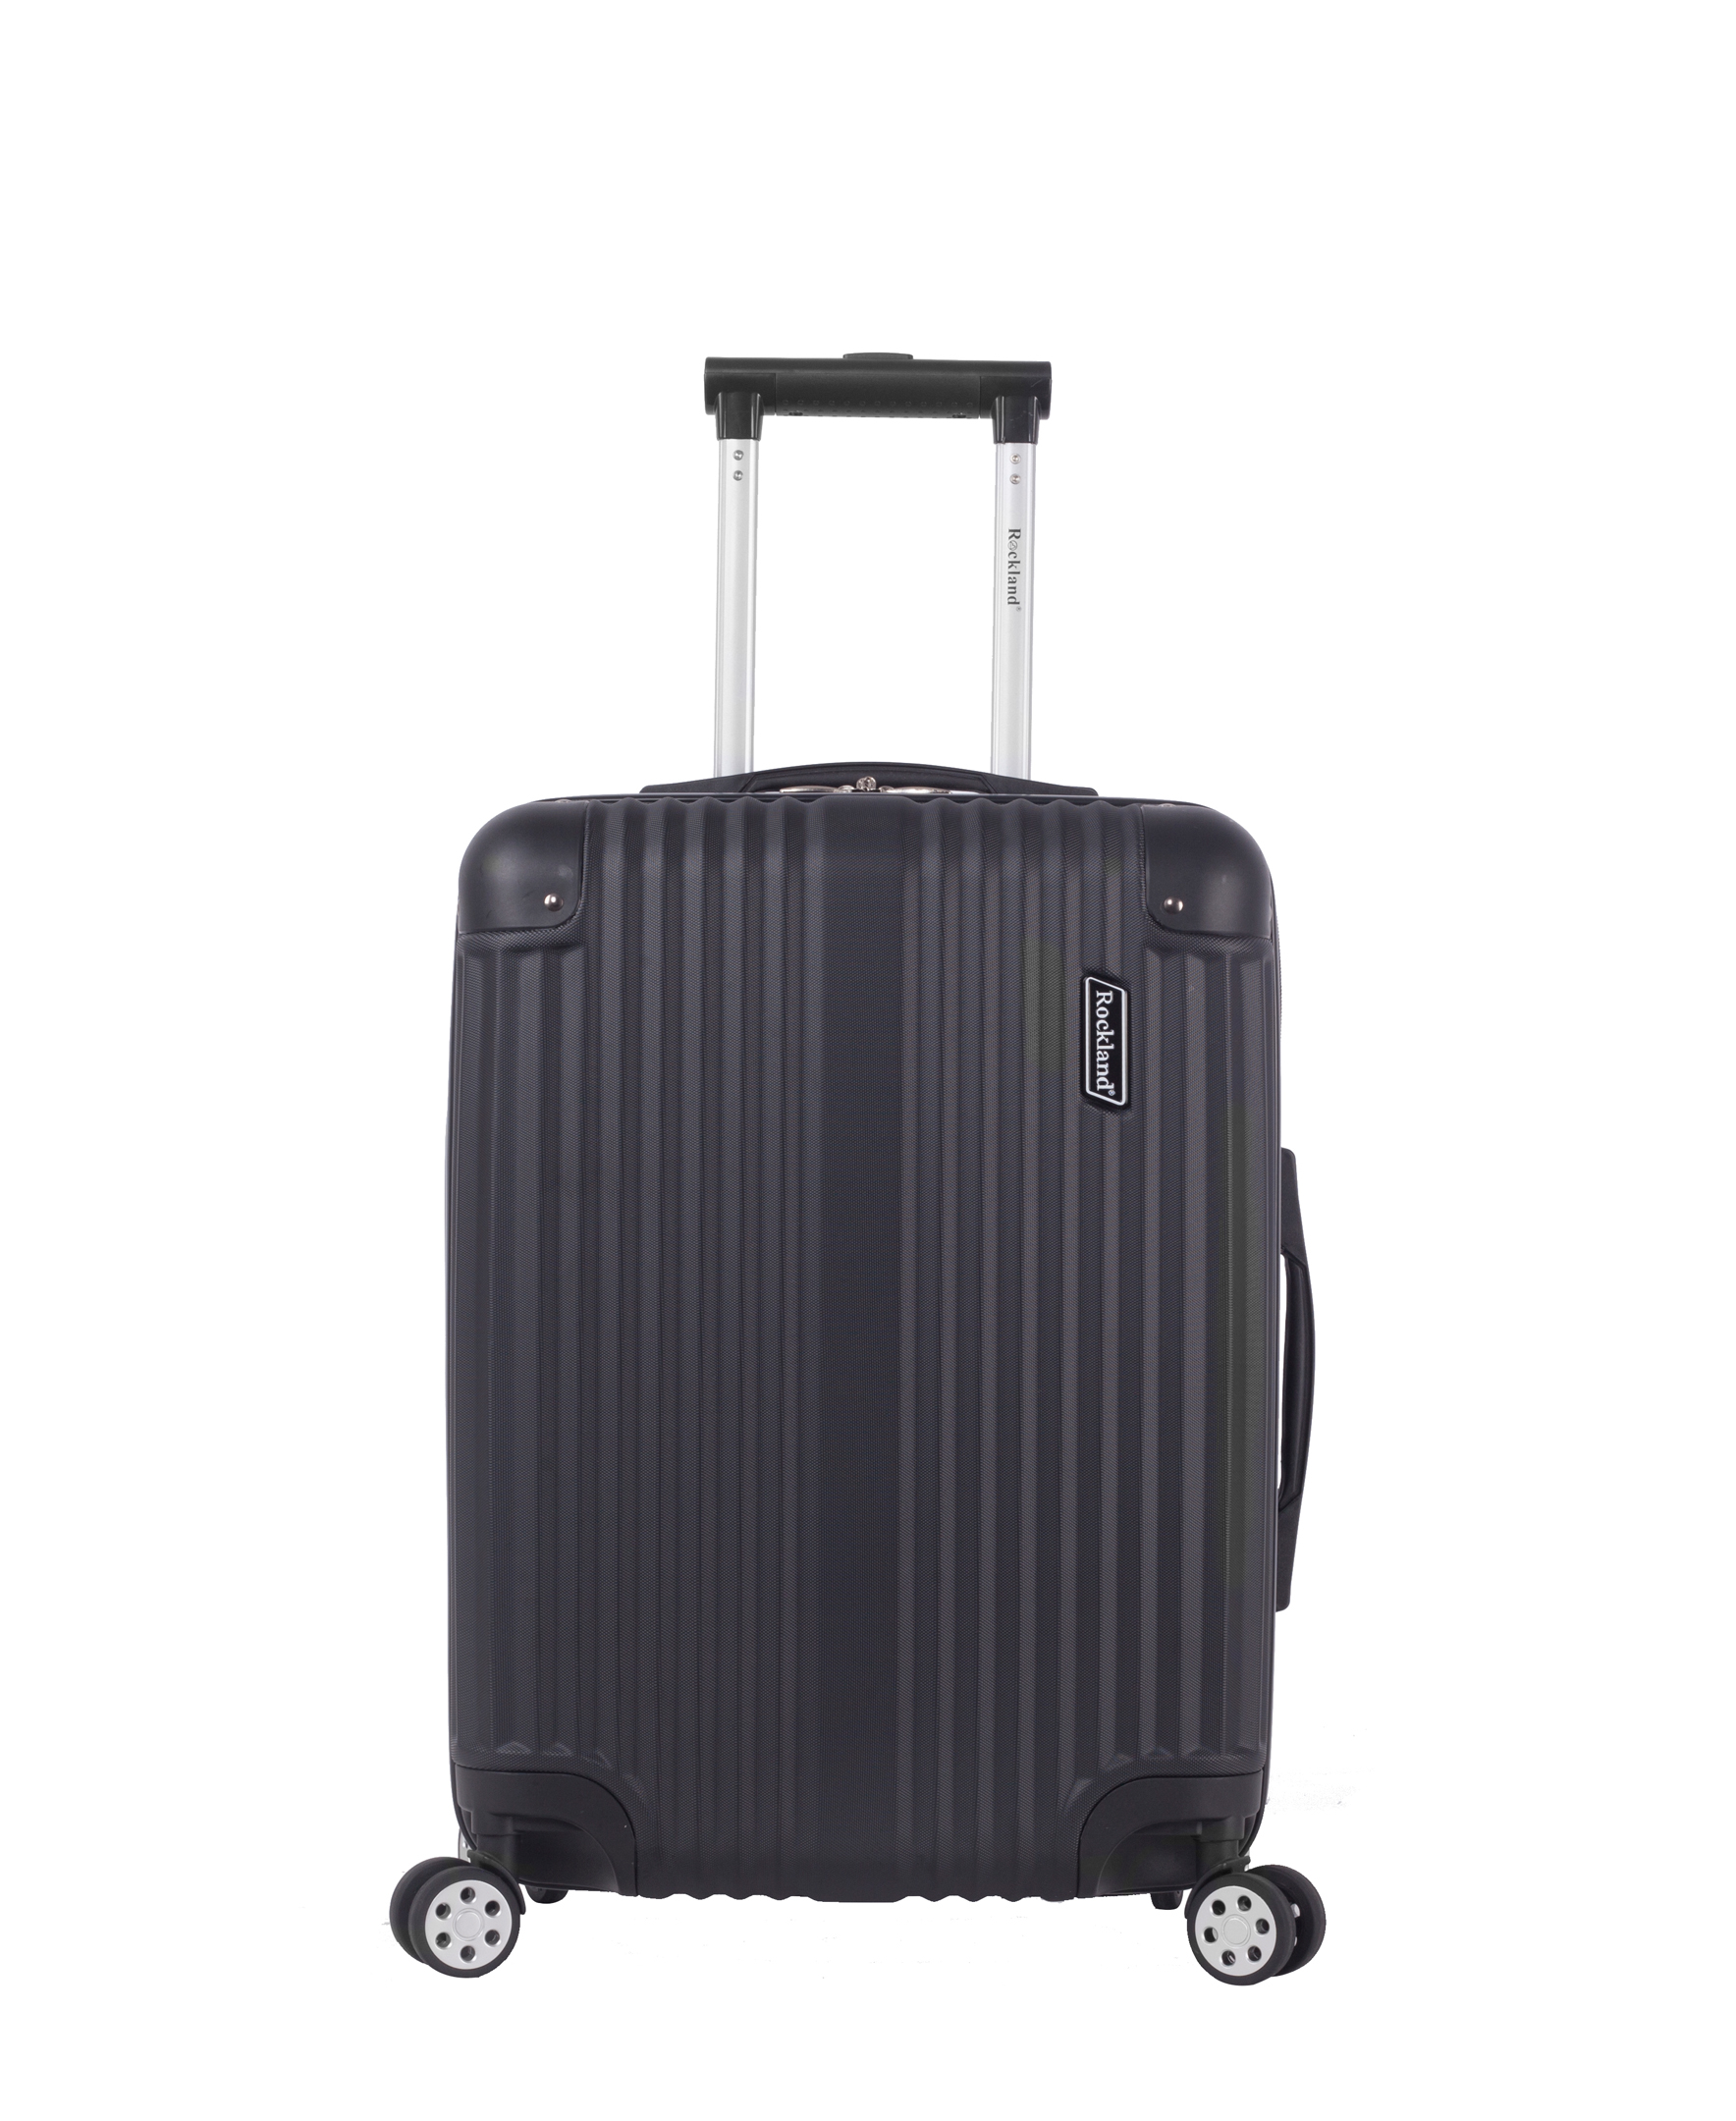 Rockland Luggage Berlin 3 Piece ABS Non-Expandable Luggage Set, Black - image 3 of 9